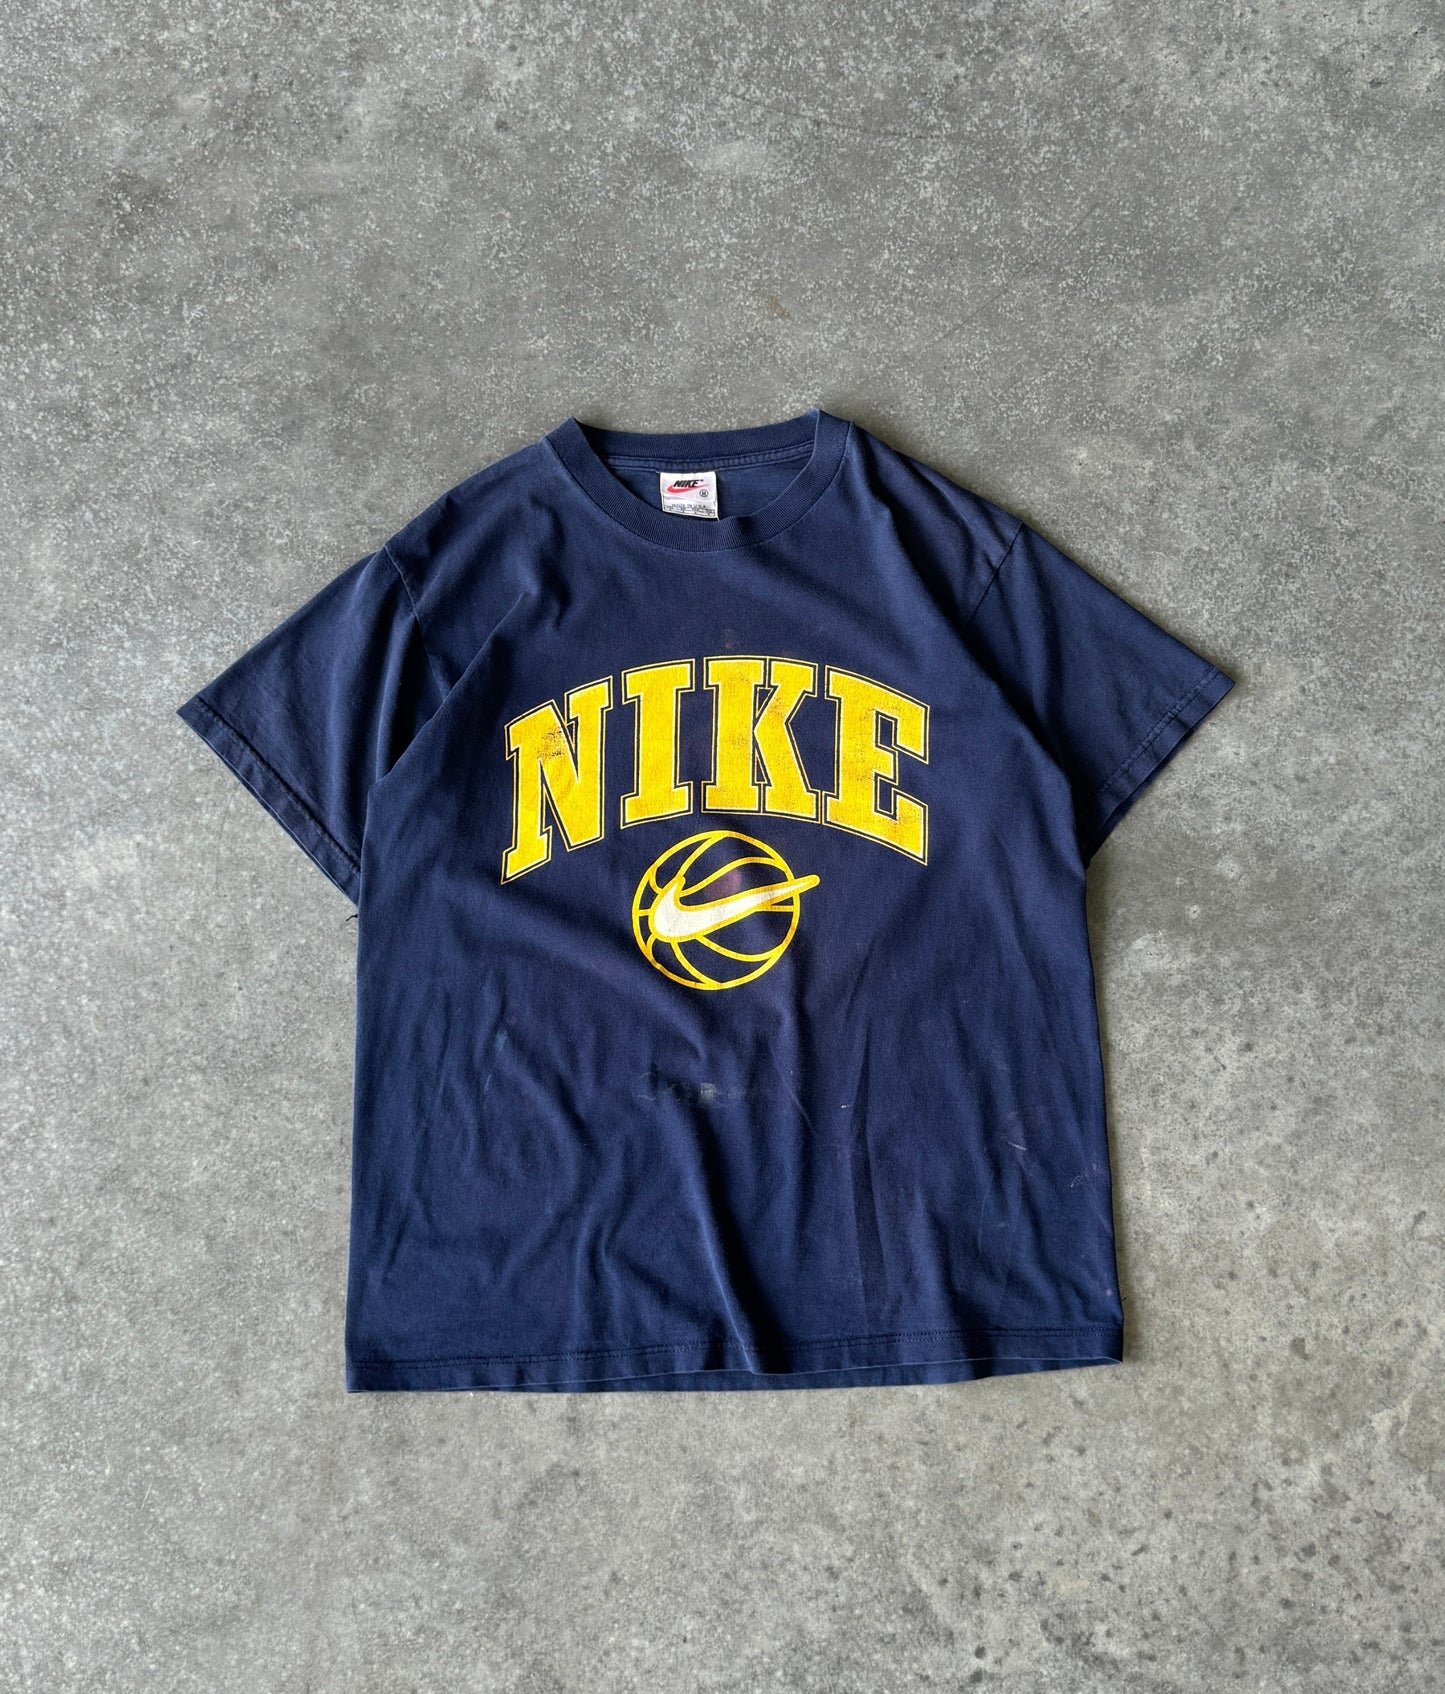 Vintage 90s Nike Spellout Tee (L)